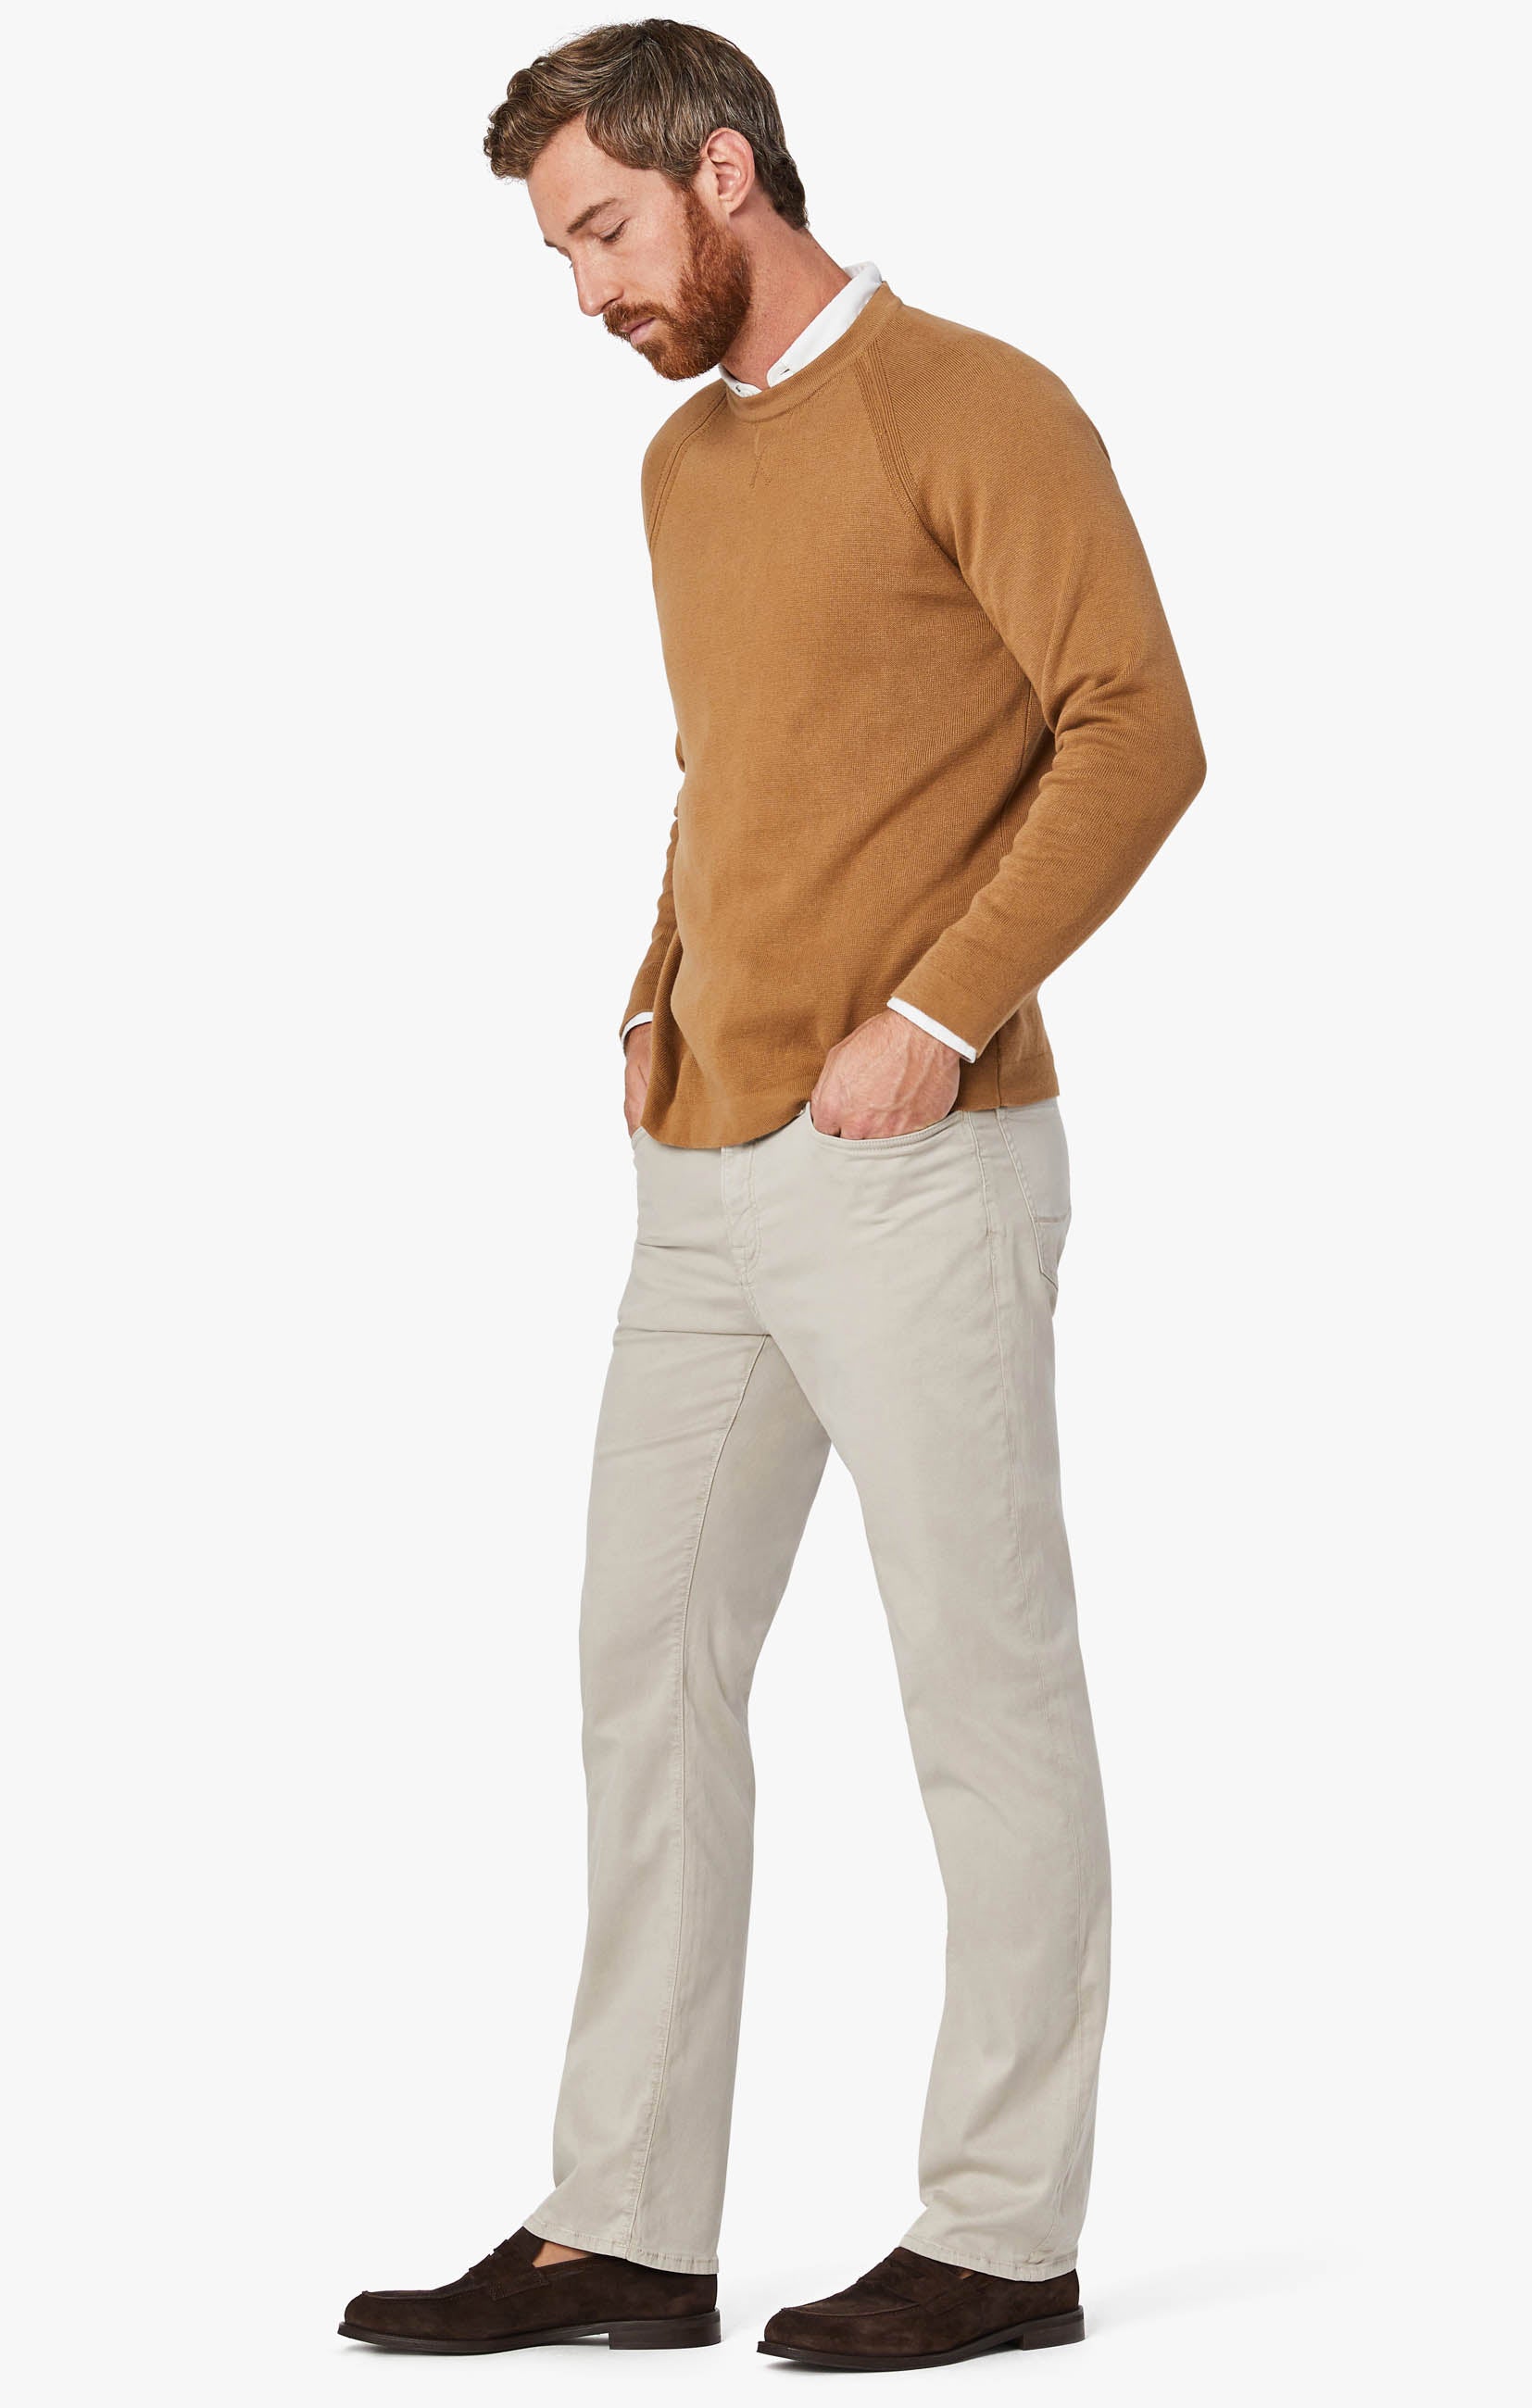 Charisma Relaxed Straight Leg Pants in Dawn Twill Image 5